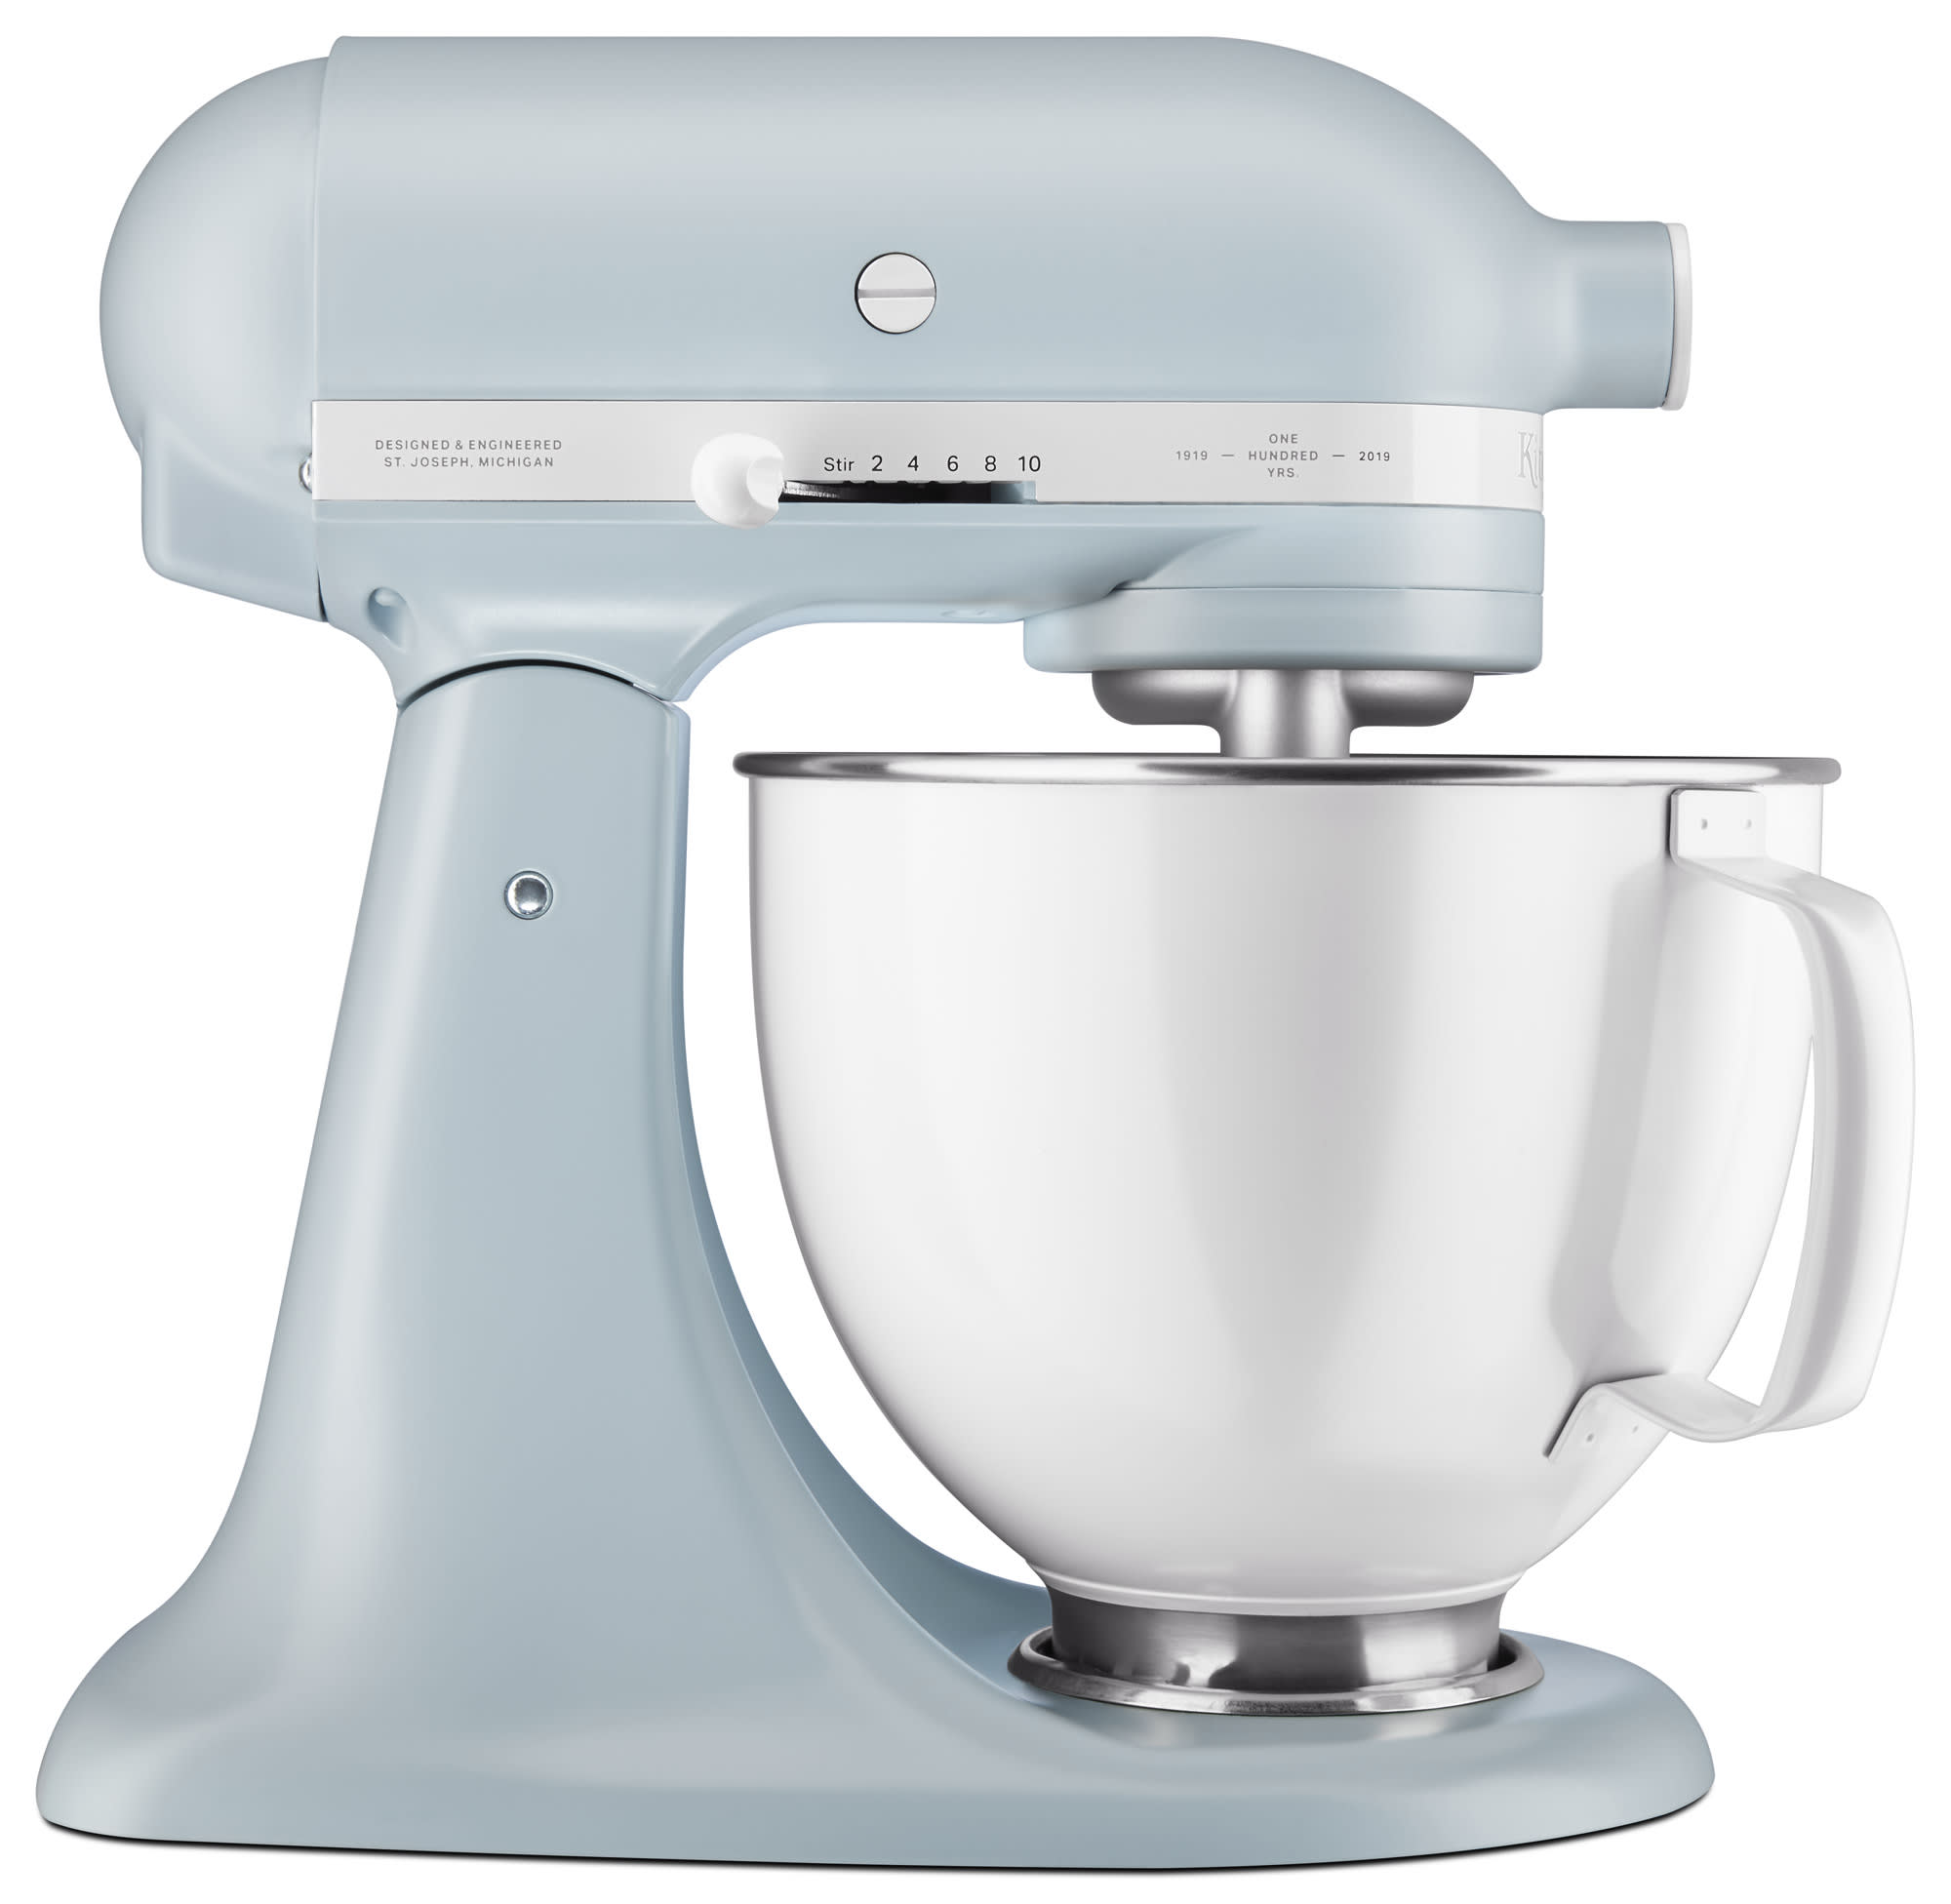 Premium AI Image  A blue kitchenaid mixer with a pink stand mixer on a  wooden table.